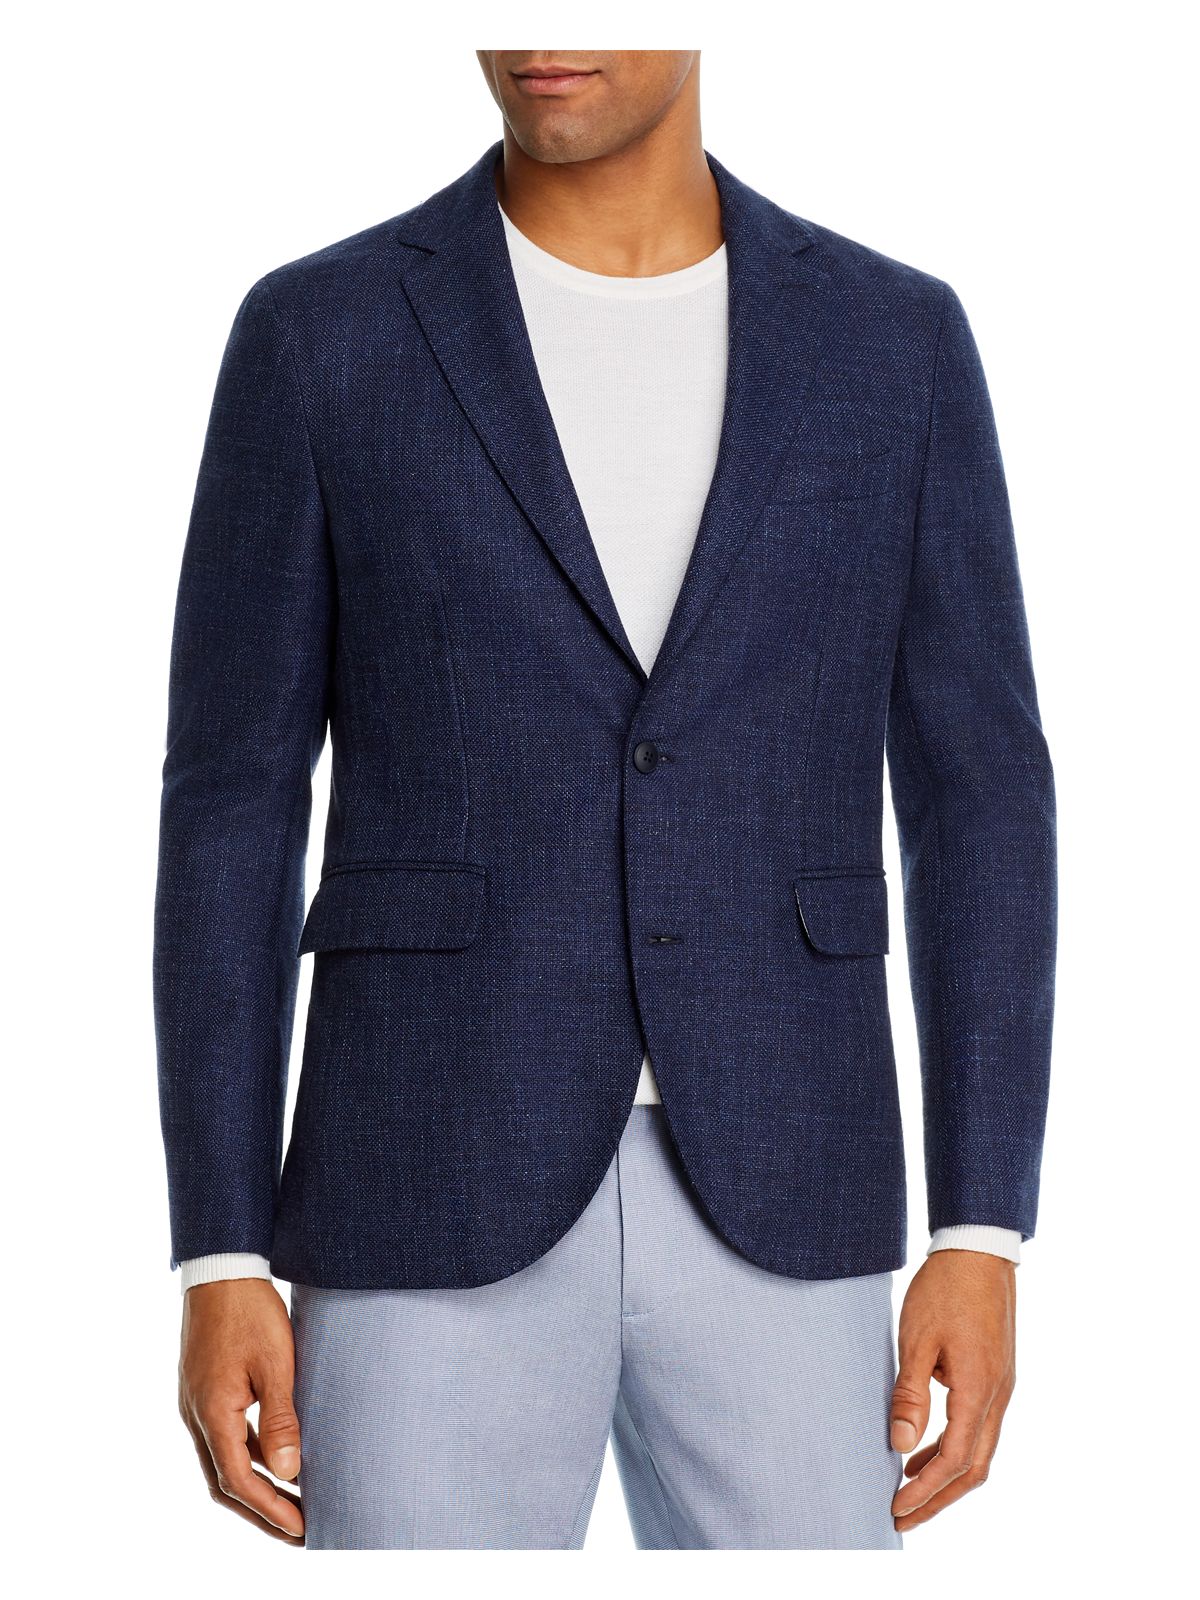 DYLAN GRAY Mens Navy Single Breasted, Cotton Blazer 46R